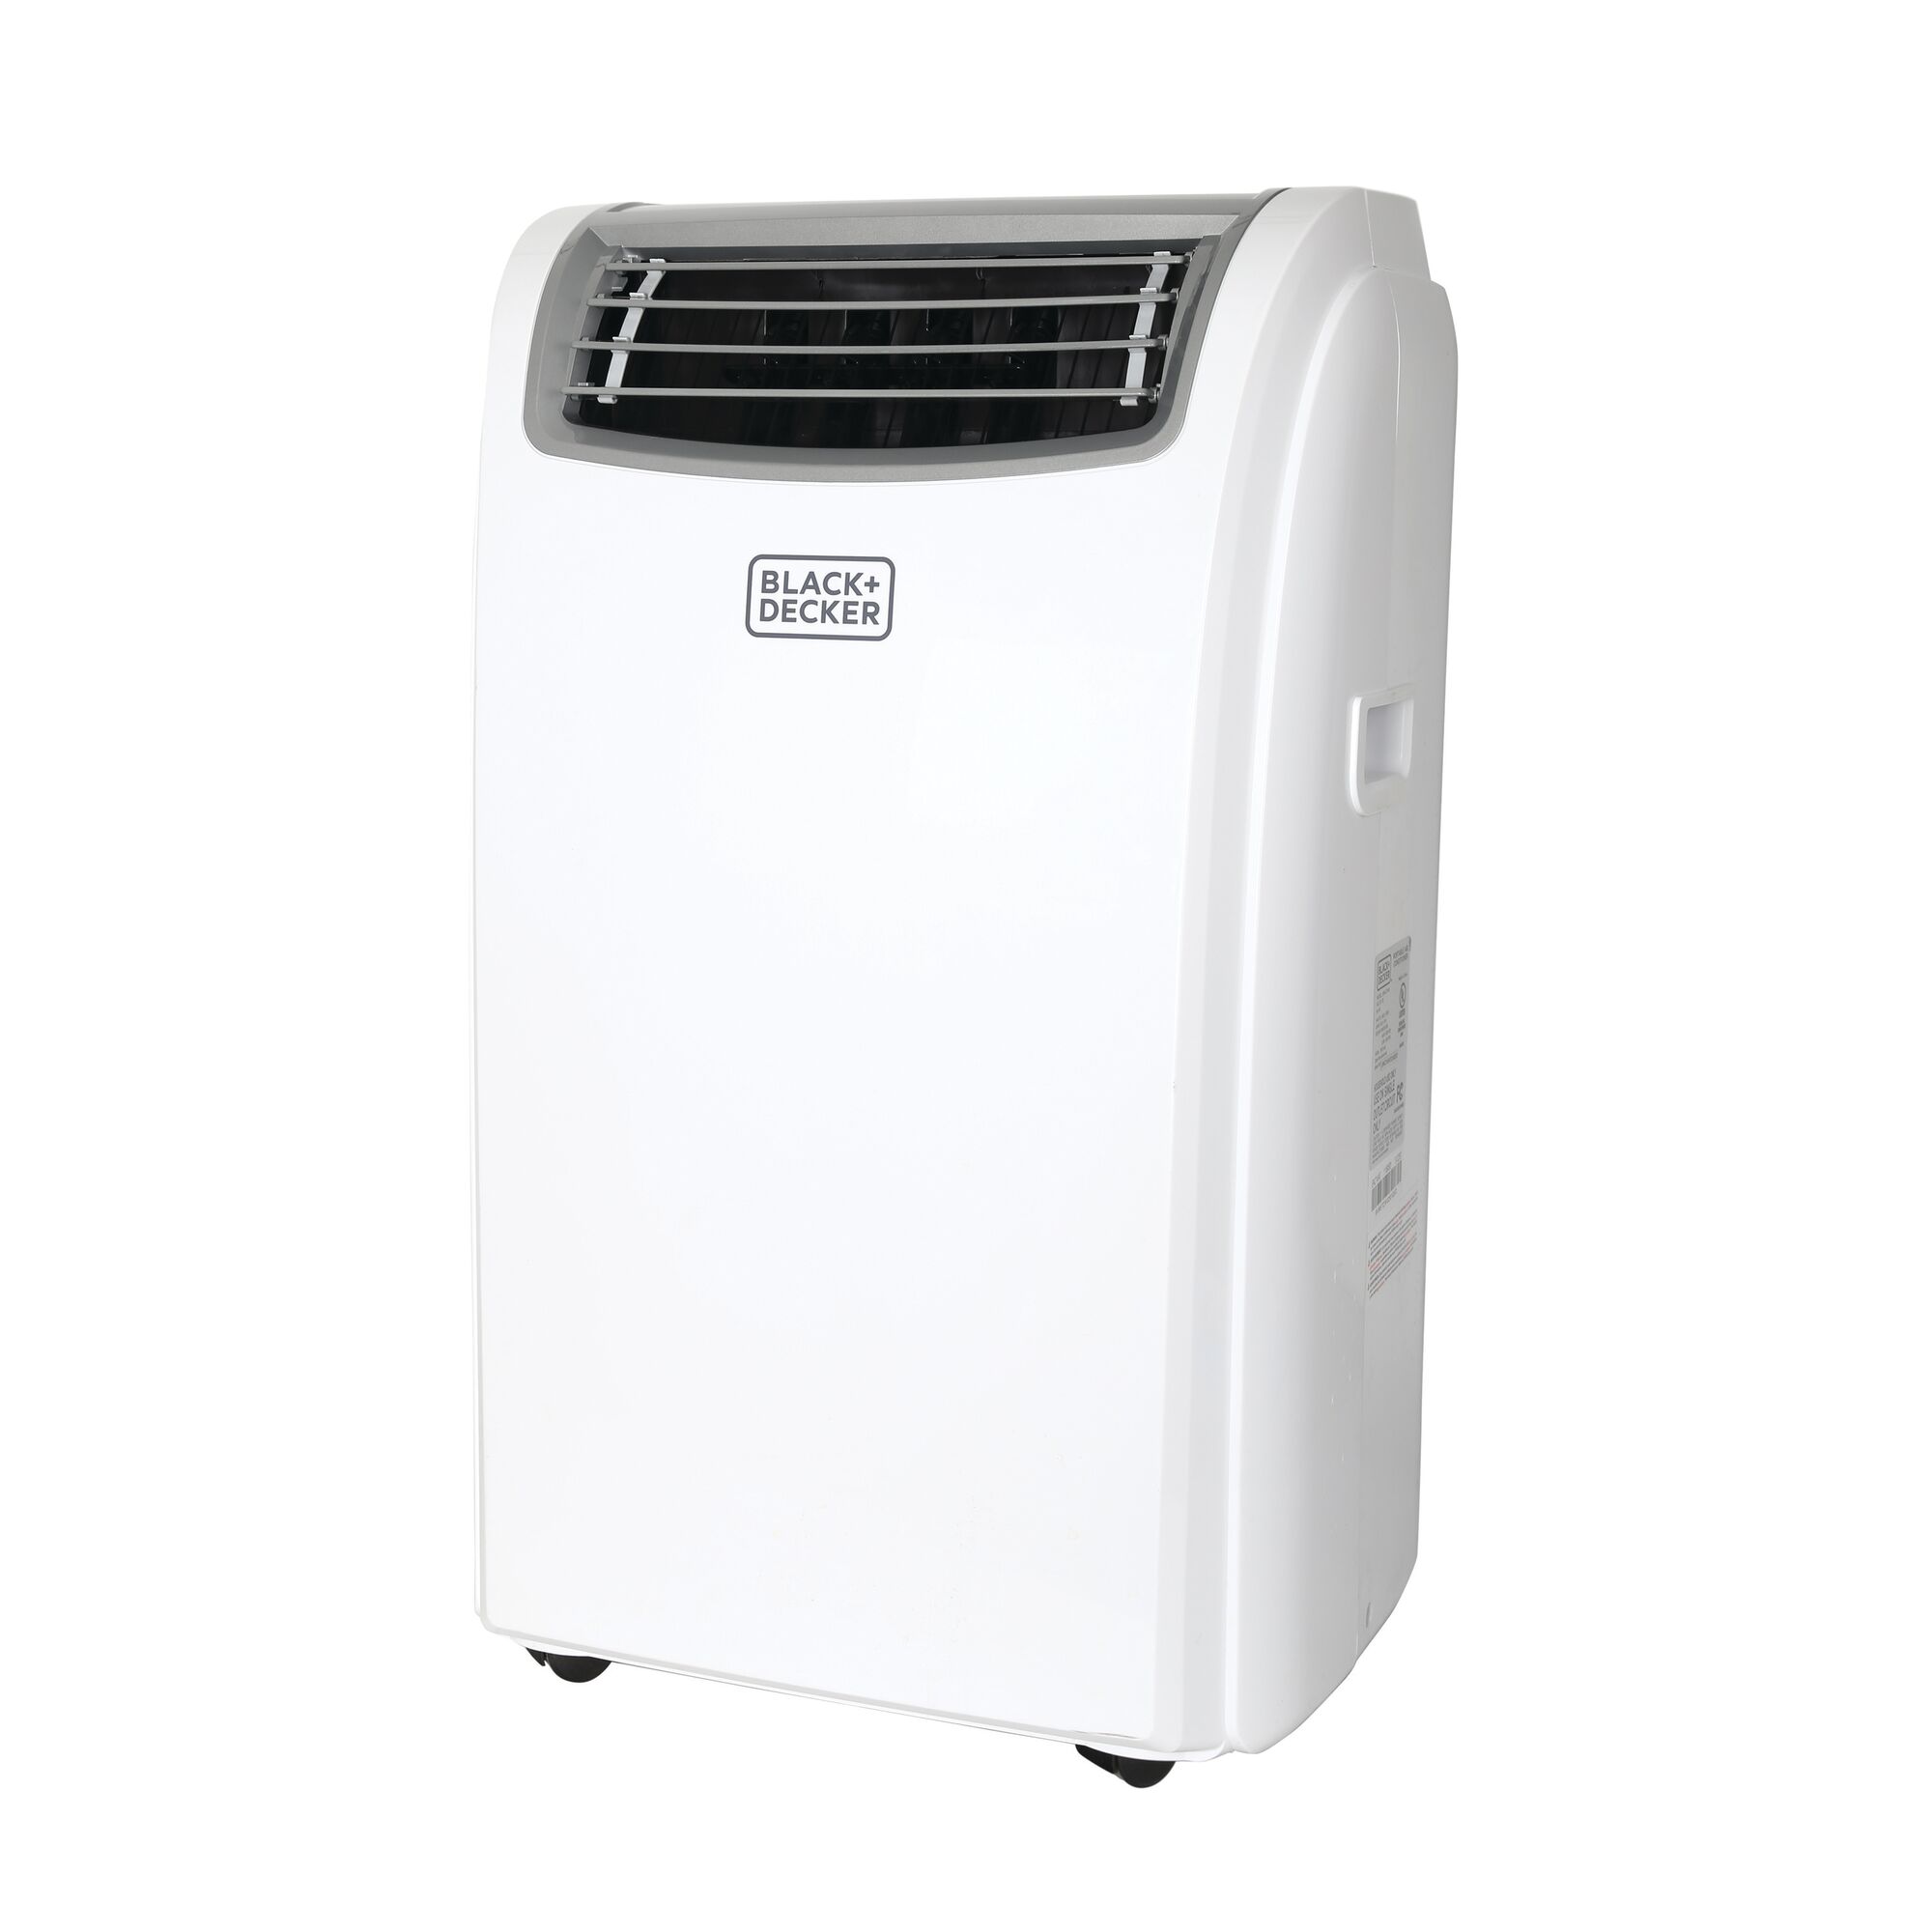 Portable Air Conditioner With Heat on white background.